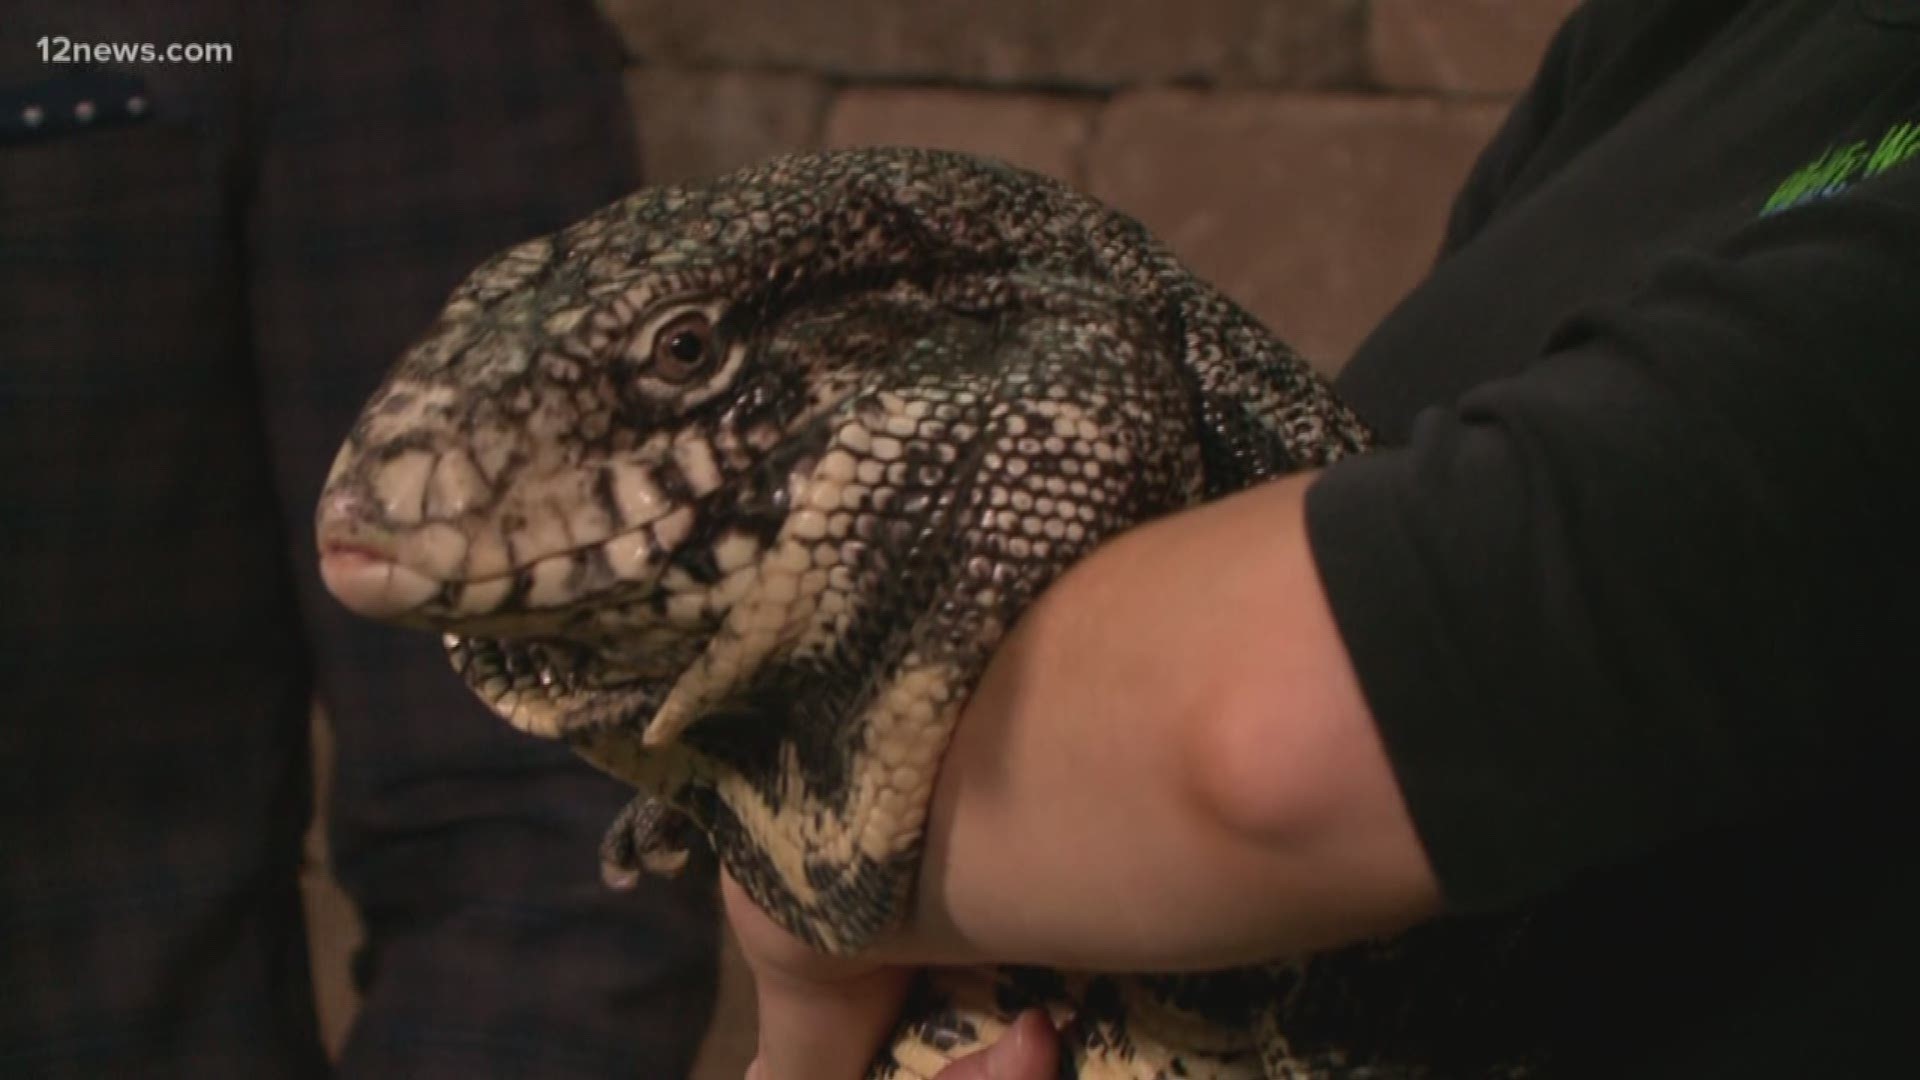 Some friends from the Wildlife World Zoo stopped by to say hello to the Today in AZ team. See Rachel and Paul chat with Titan, an Argentine Tegu.